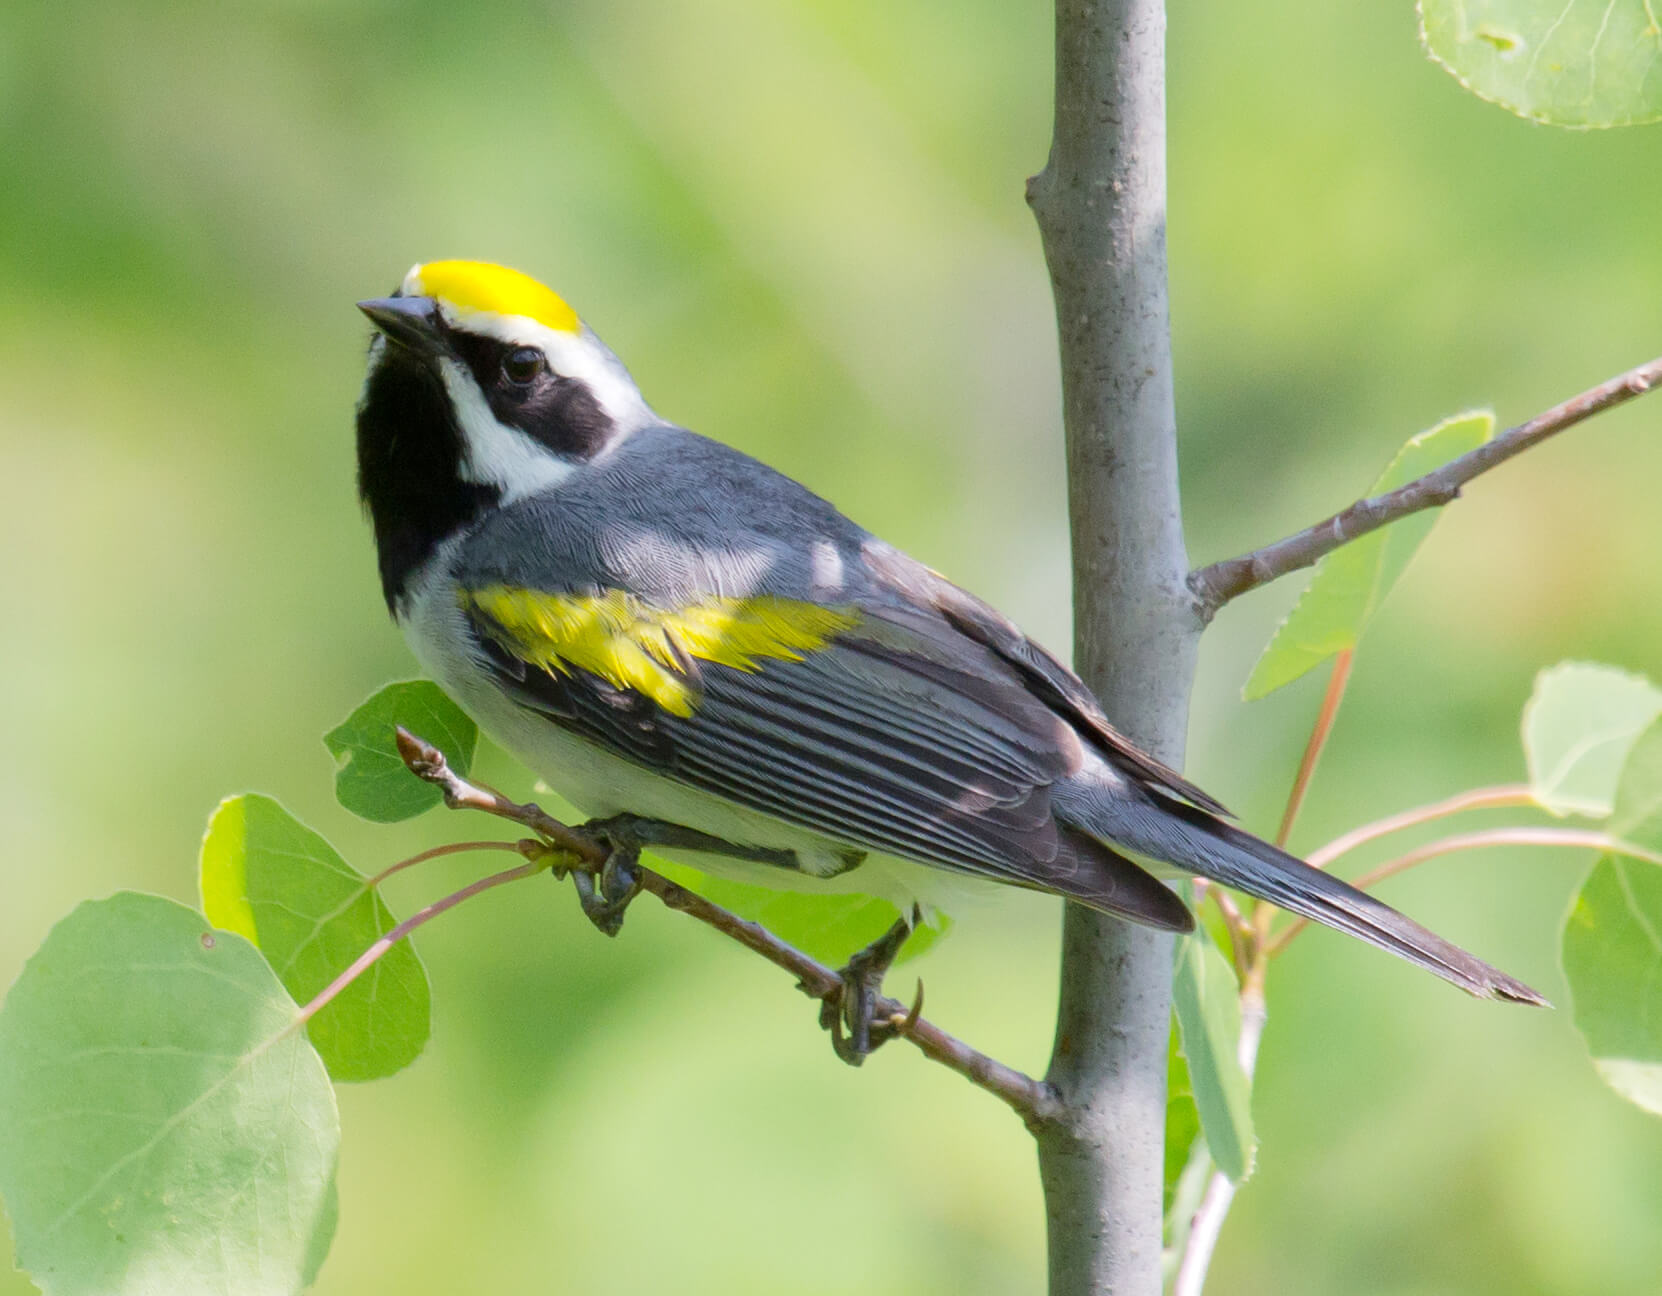 Golden-winged Warbler have responded quickly to habitat management at Tamarac National Wildlife Refuge in Minnesota. Photo by Laura Erickson